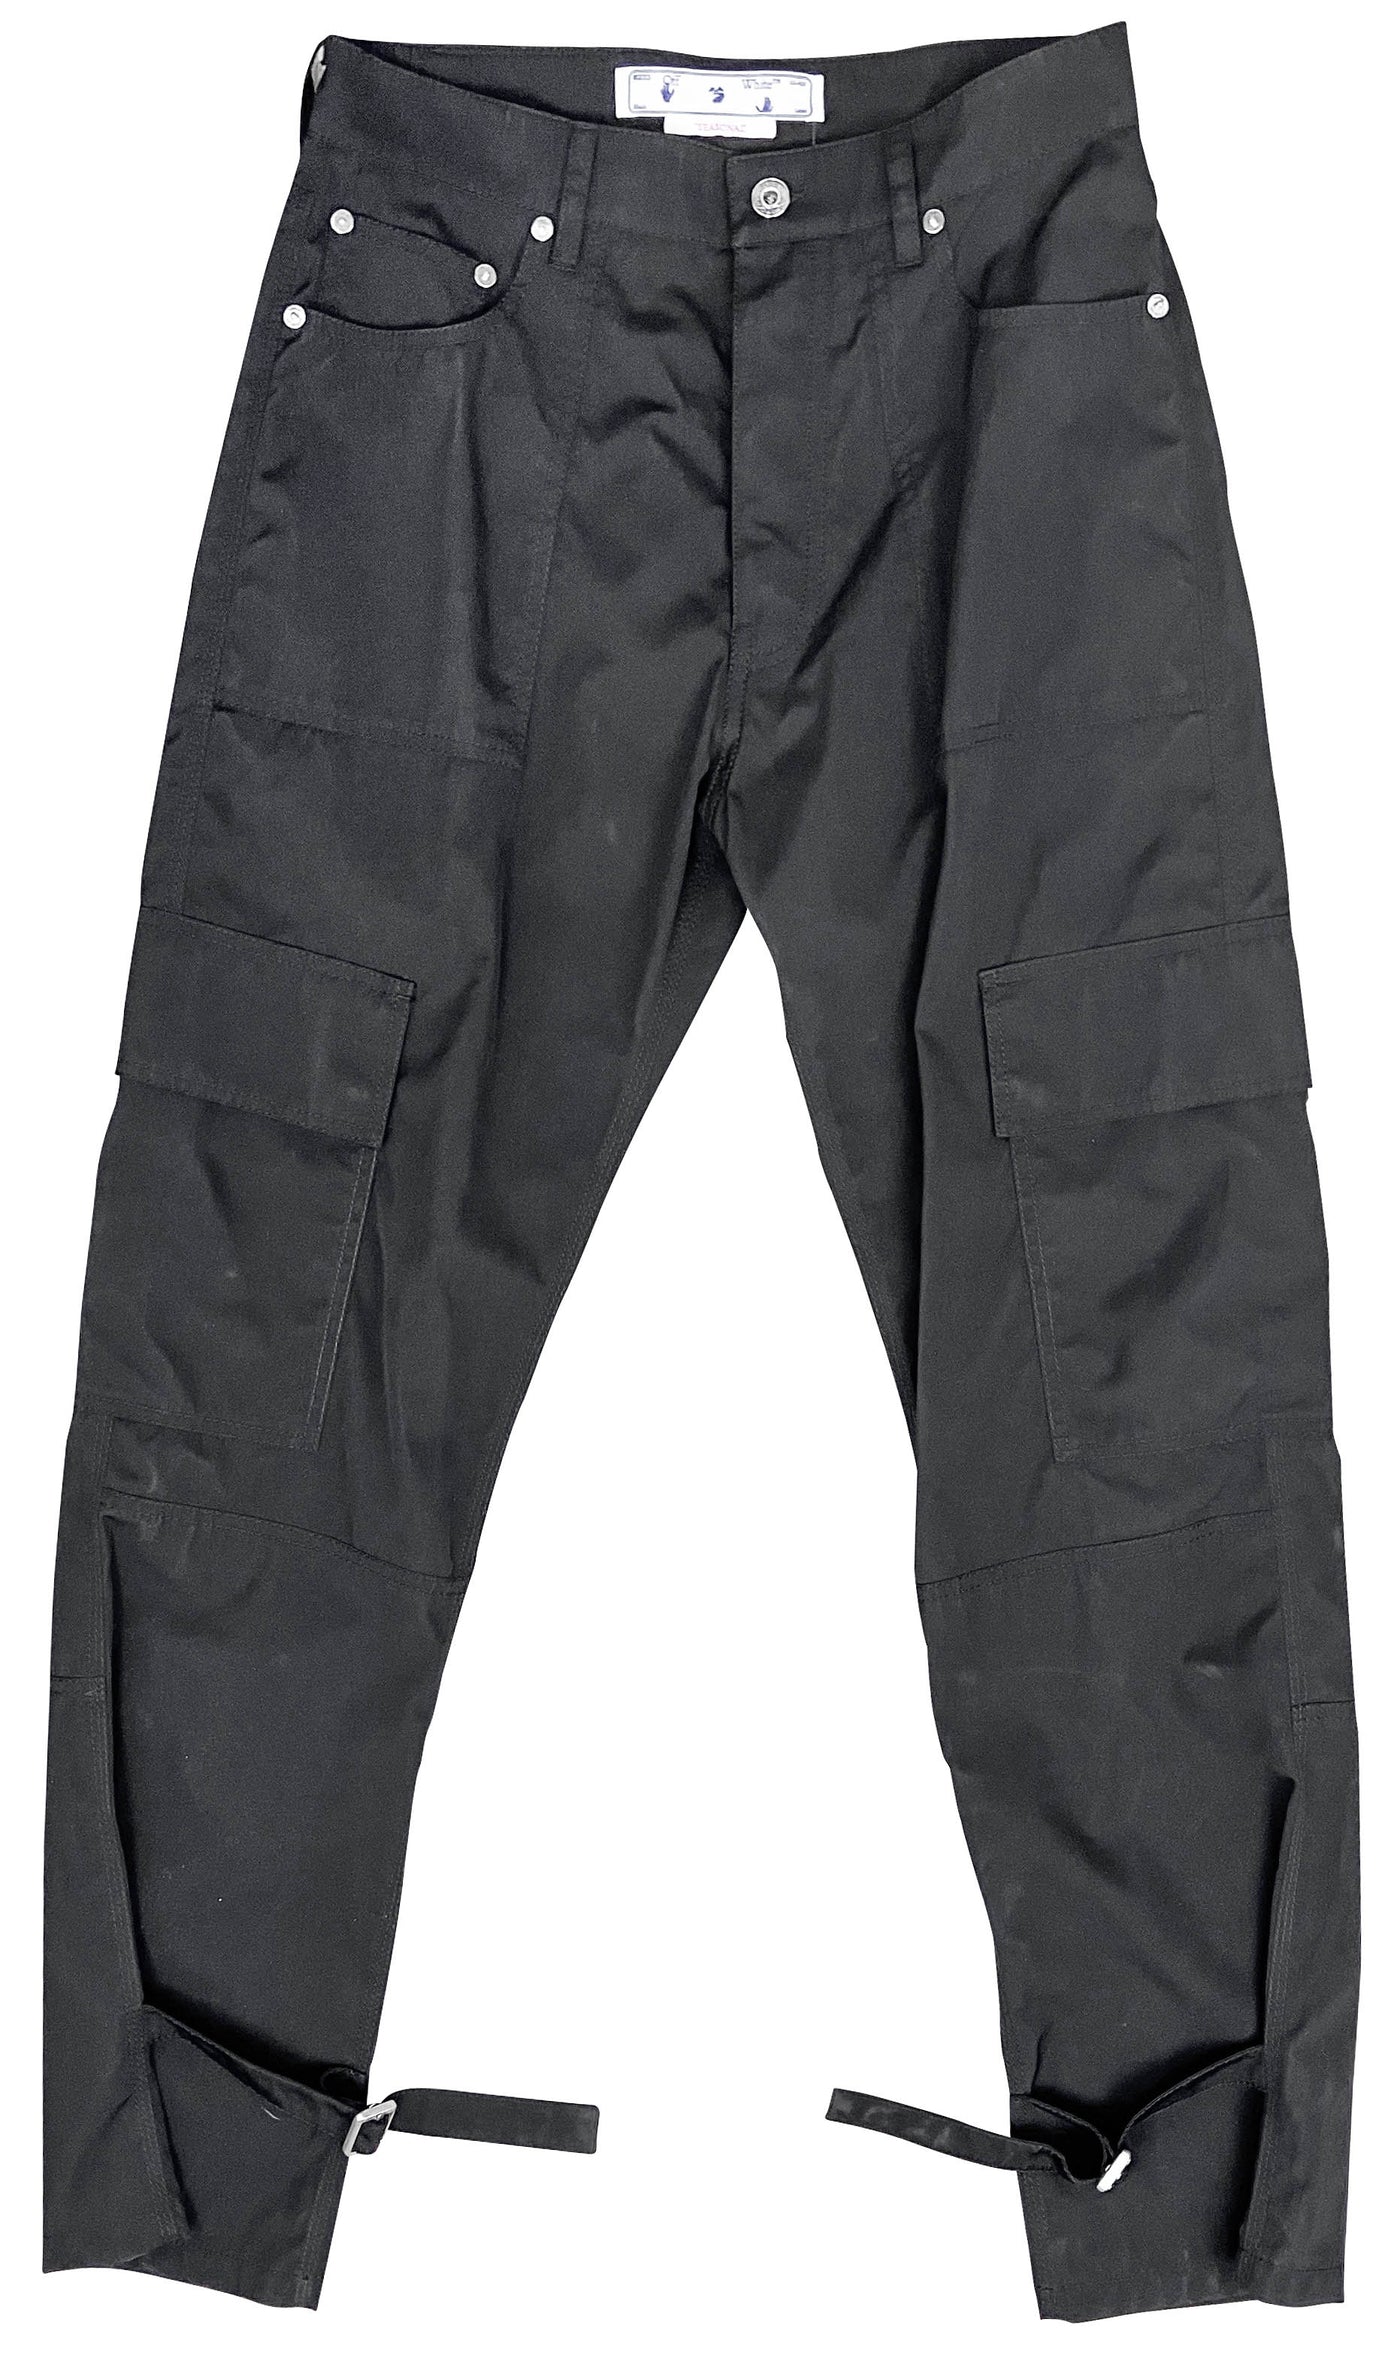 Off-White Wave Cargo Pants in Black - Discounts on Off-White at UAL